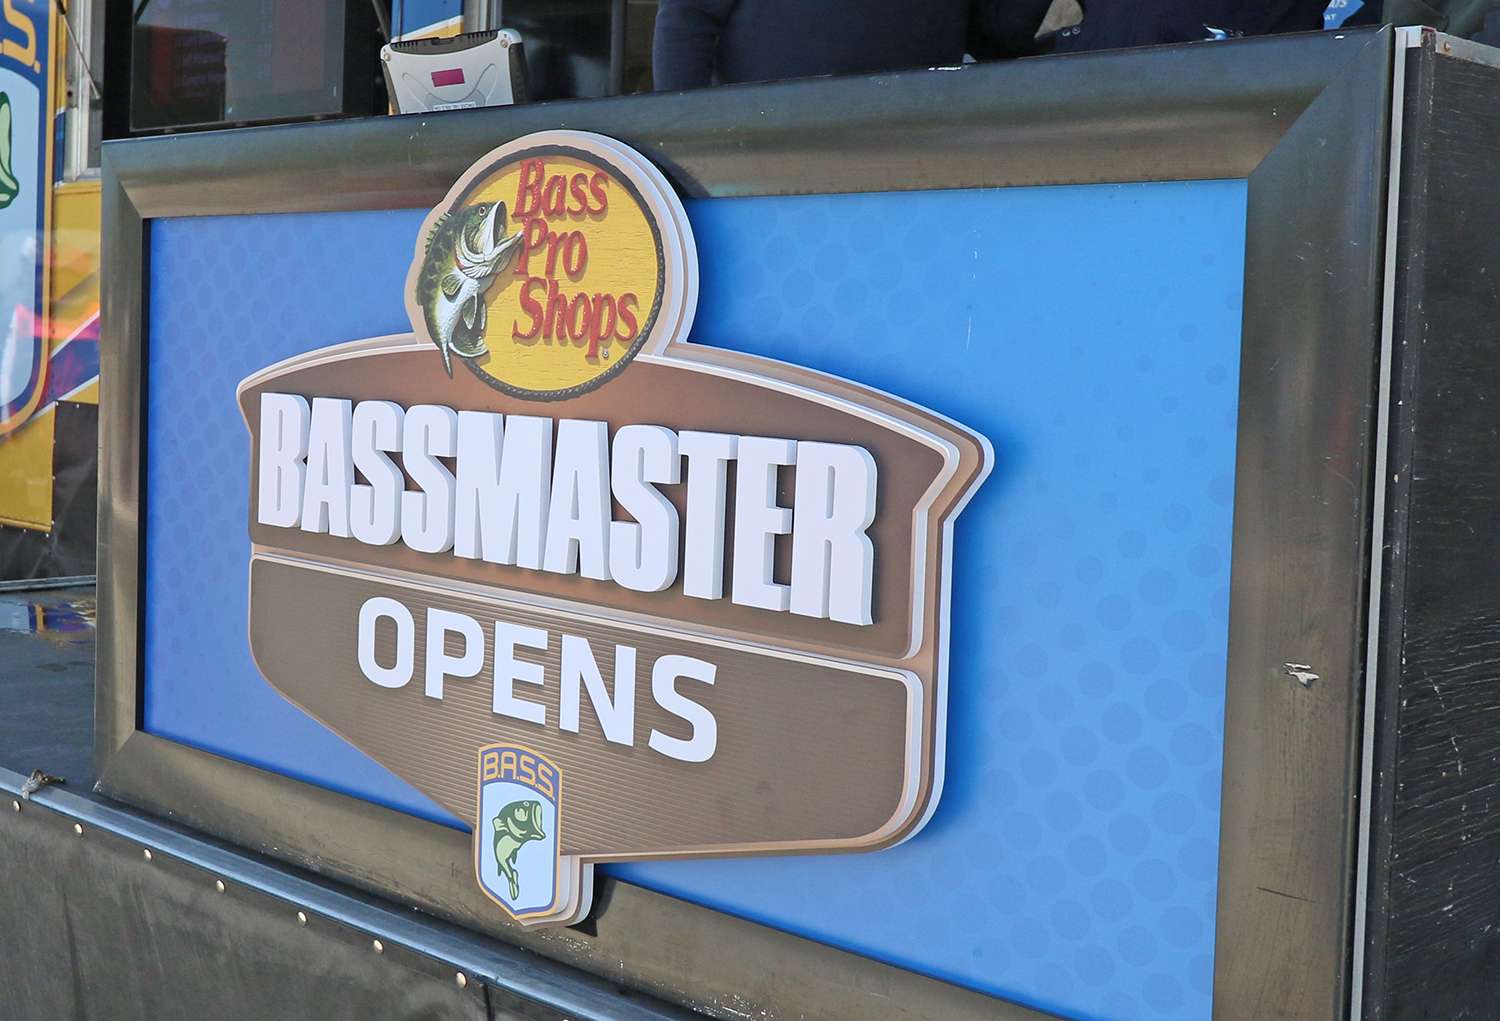 Here are the top pro and co-angler contenders at the 2018 Bass Pro Shops Central Open #2 at Arkansas River.